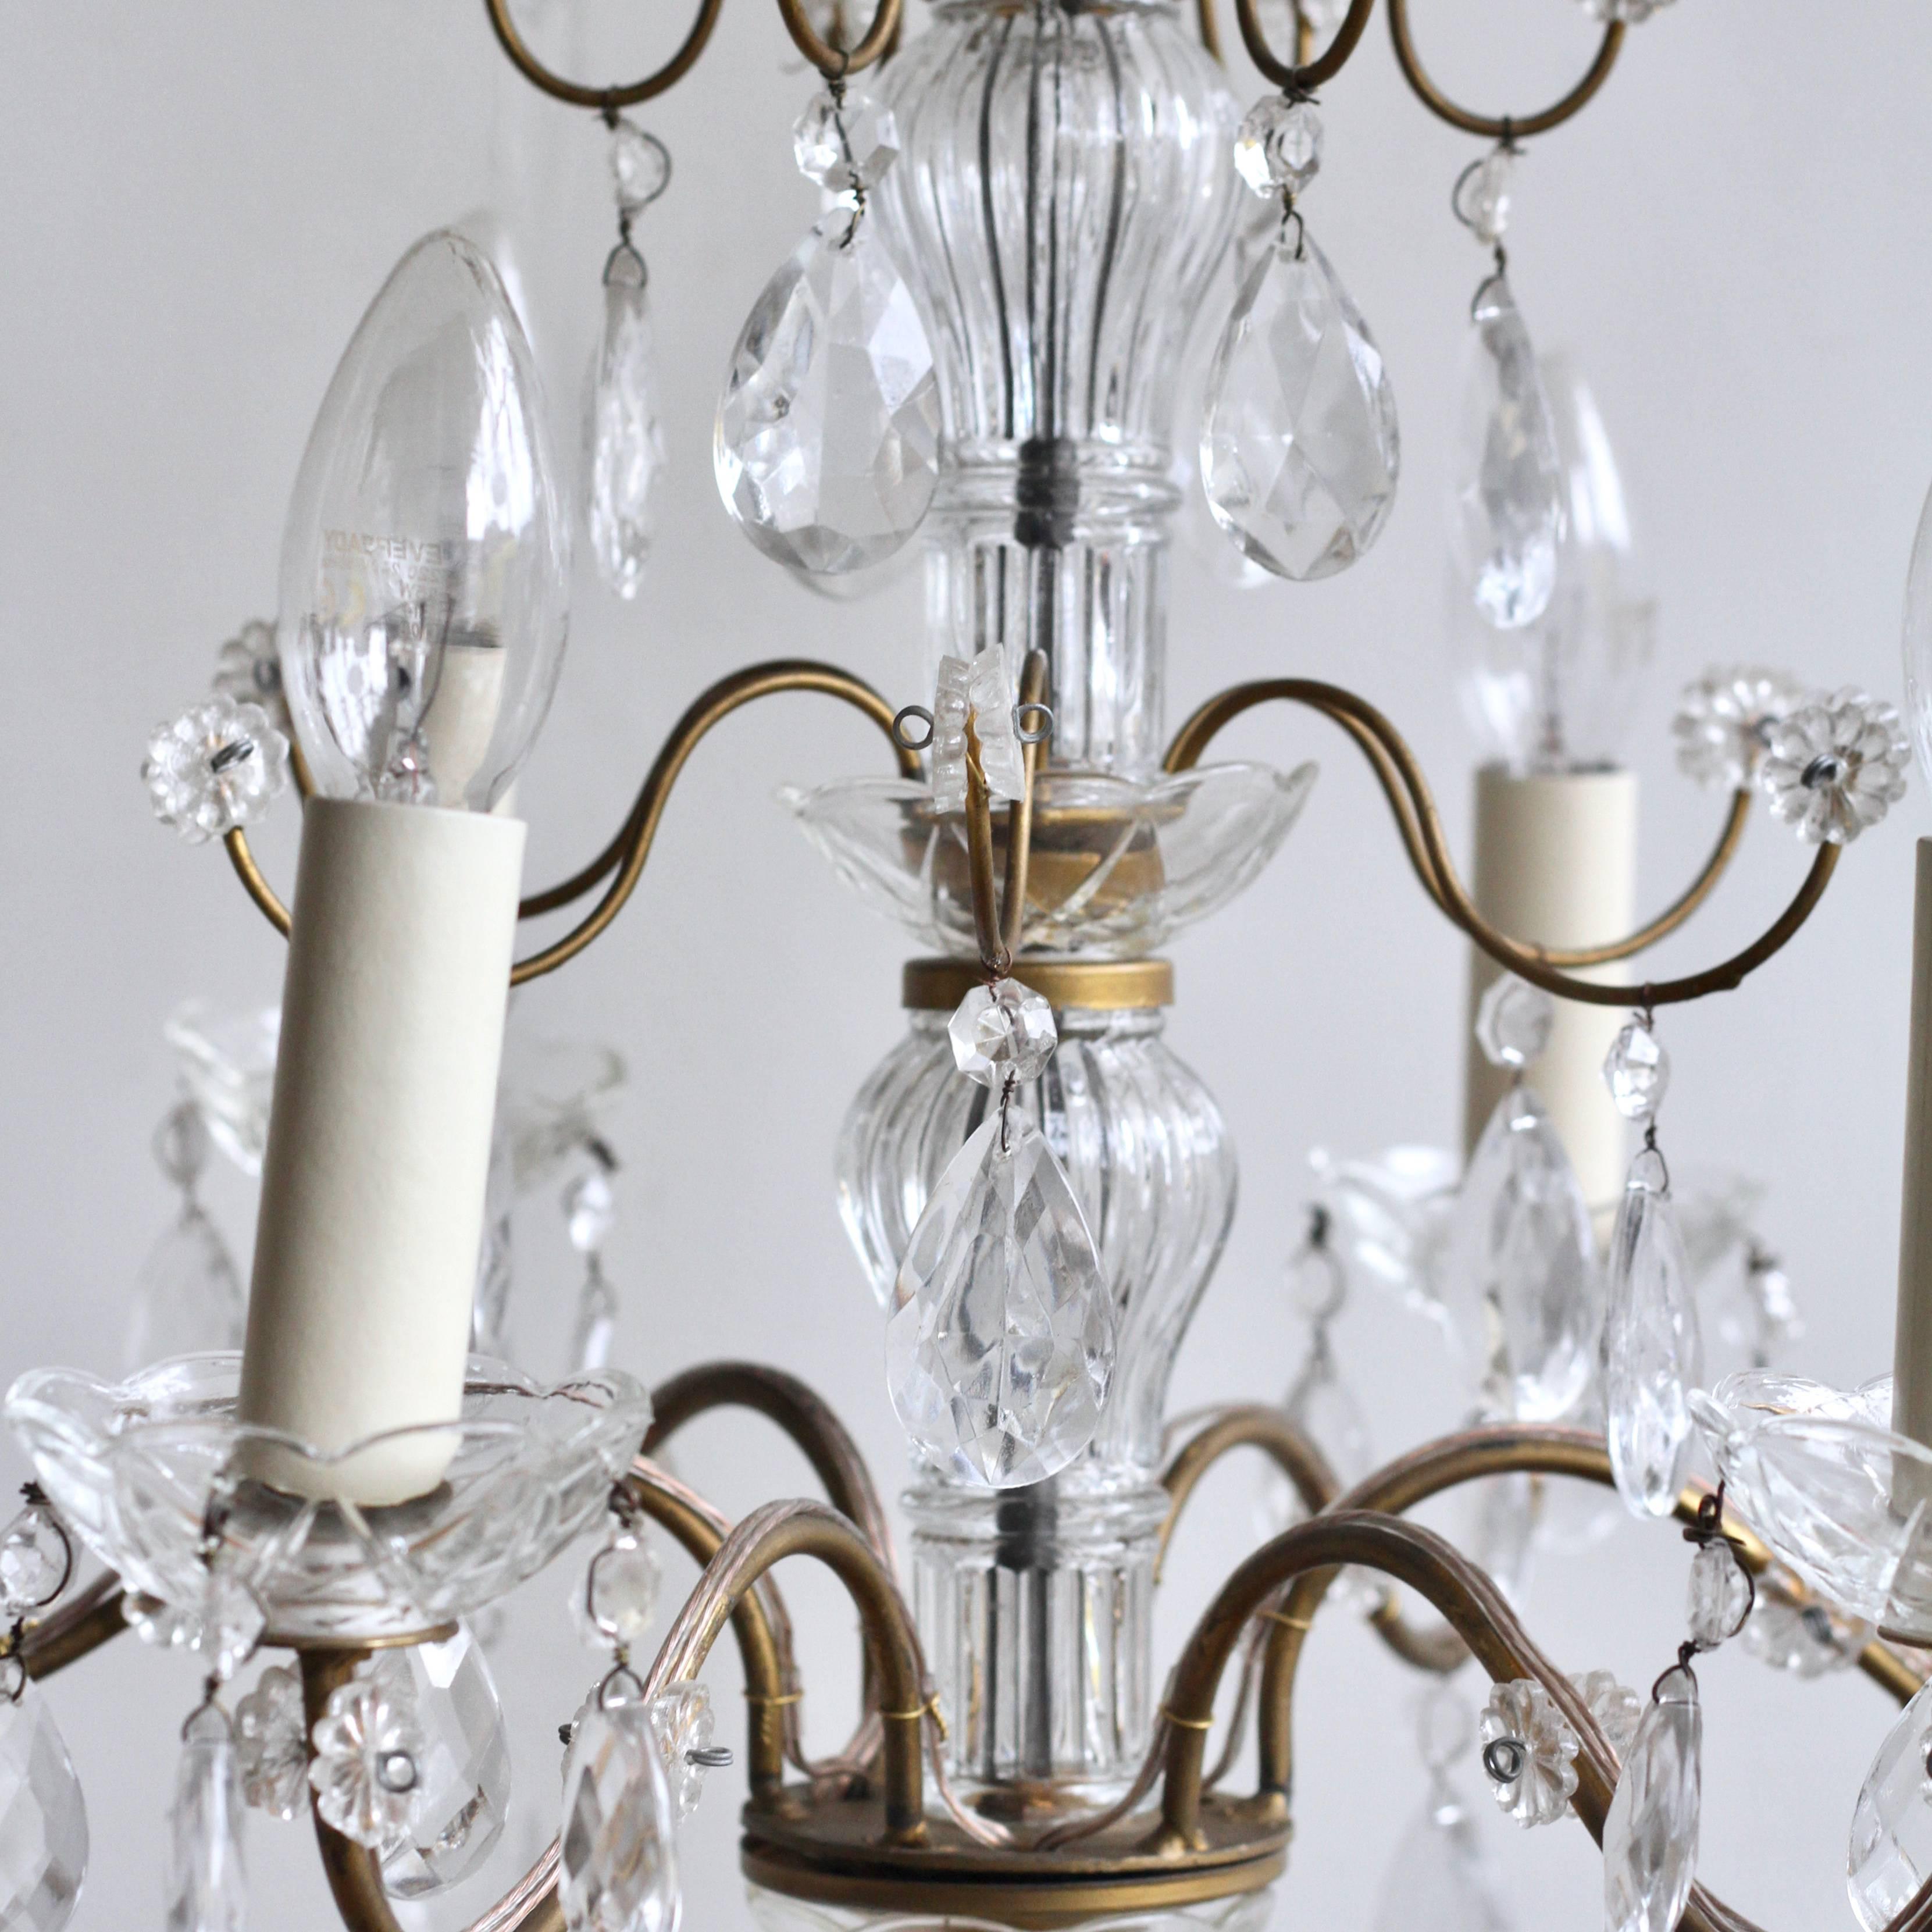 Three delicate pretty French chandeliers available as a set of three. The brass frame retains it's original gold paint which has worn slightly forming a lovely patina. These 1930s French chandeliers are dressed in glass pear drops and glass